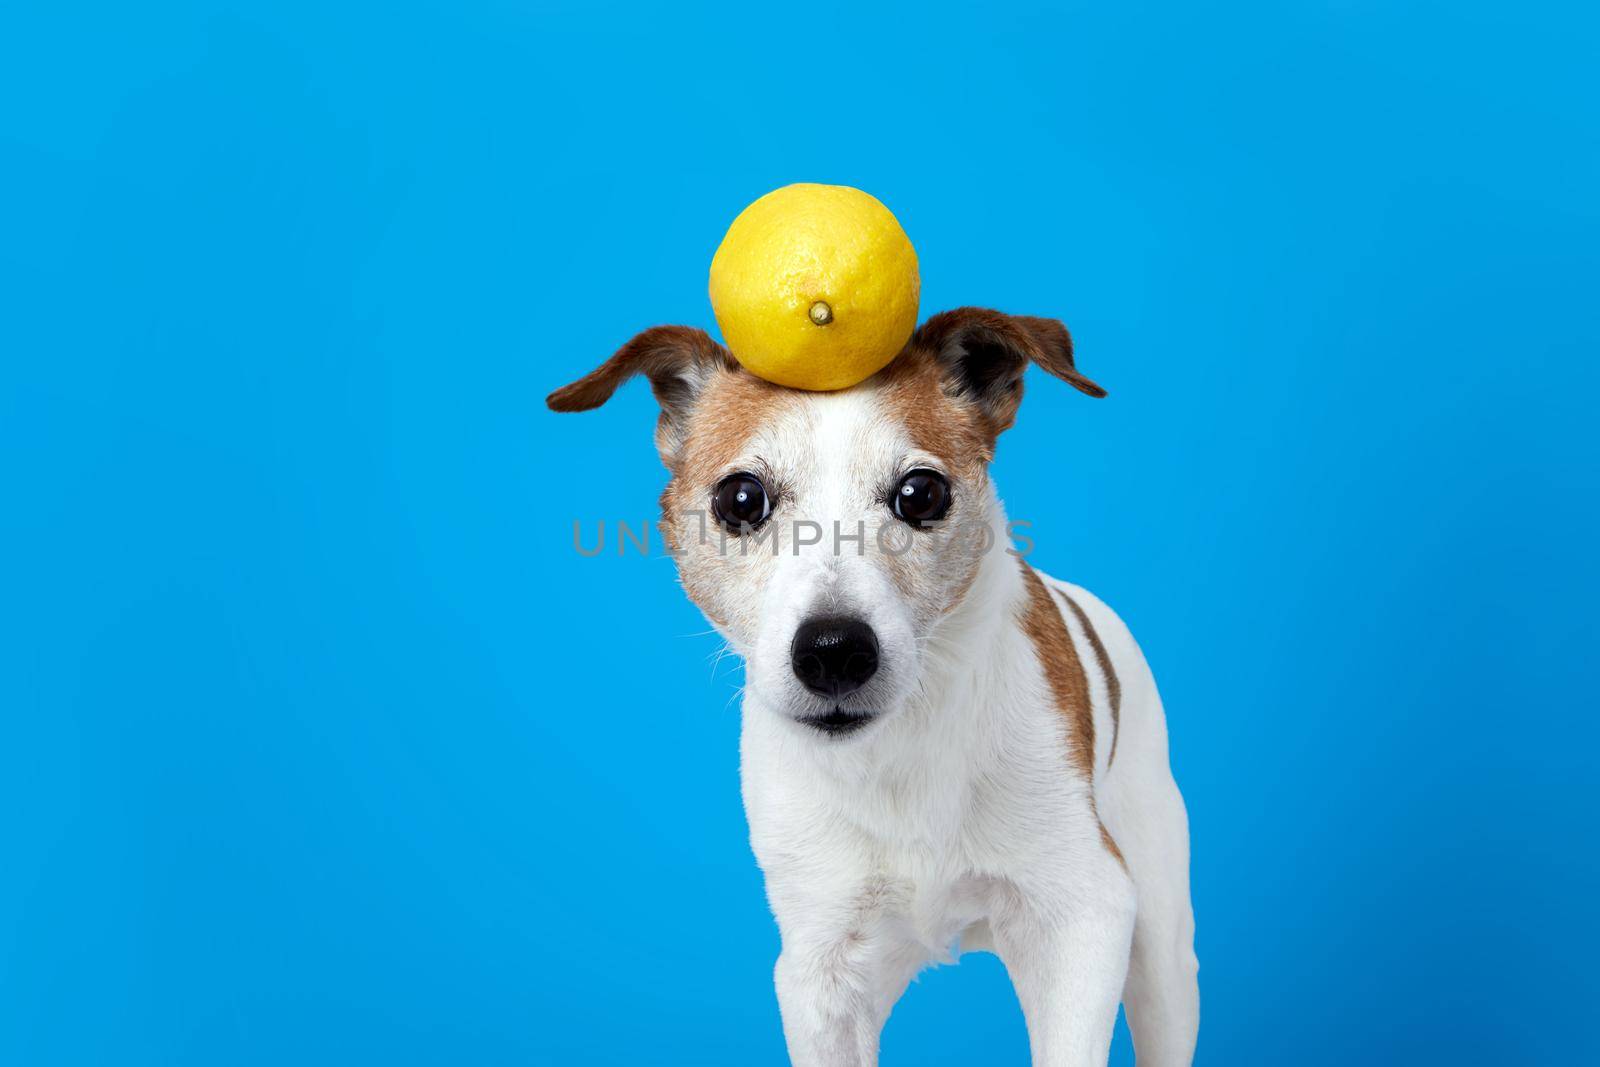 Funny dog with lemon on head blue background by Demkat